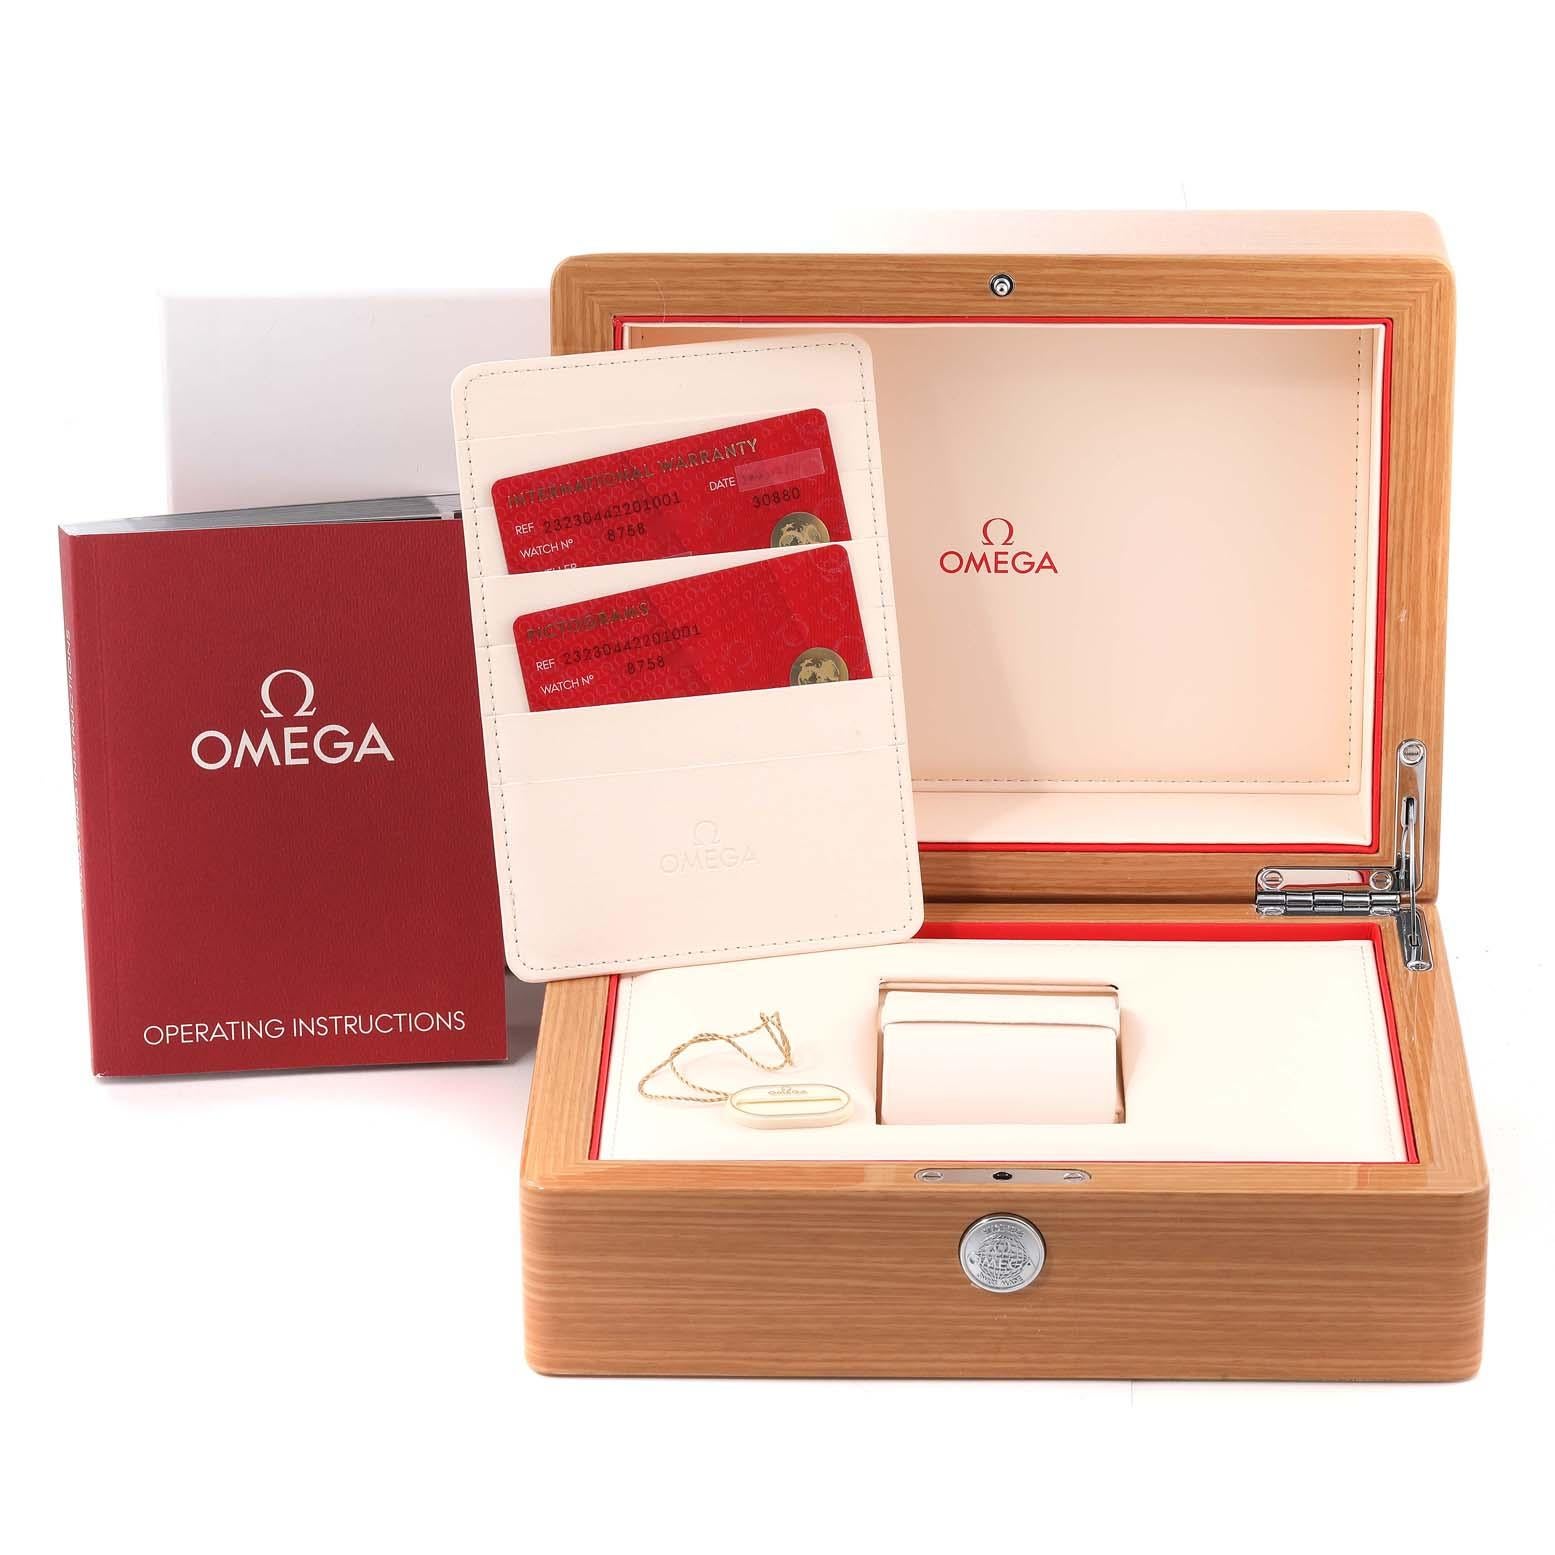 Omega Seamaster Planet Ocean Steel Mens Watch 232.30.44.22.01.001 Box Card For Sale 5